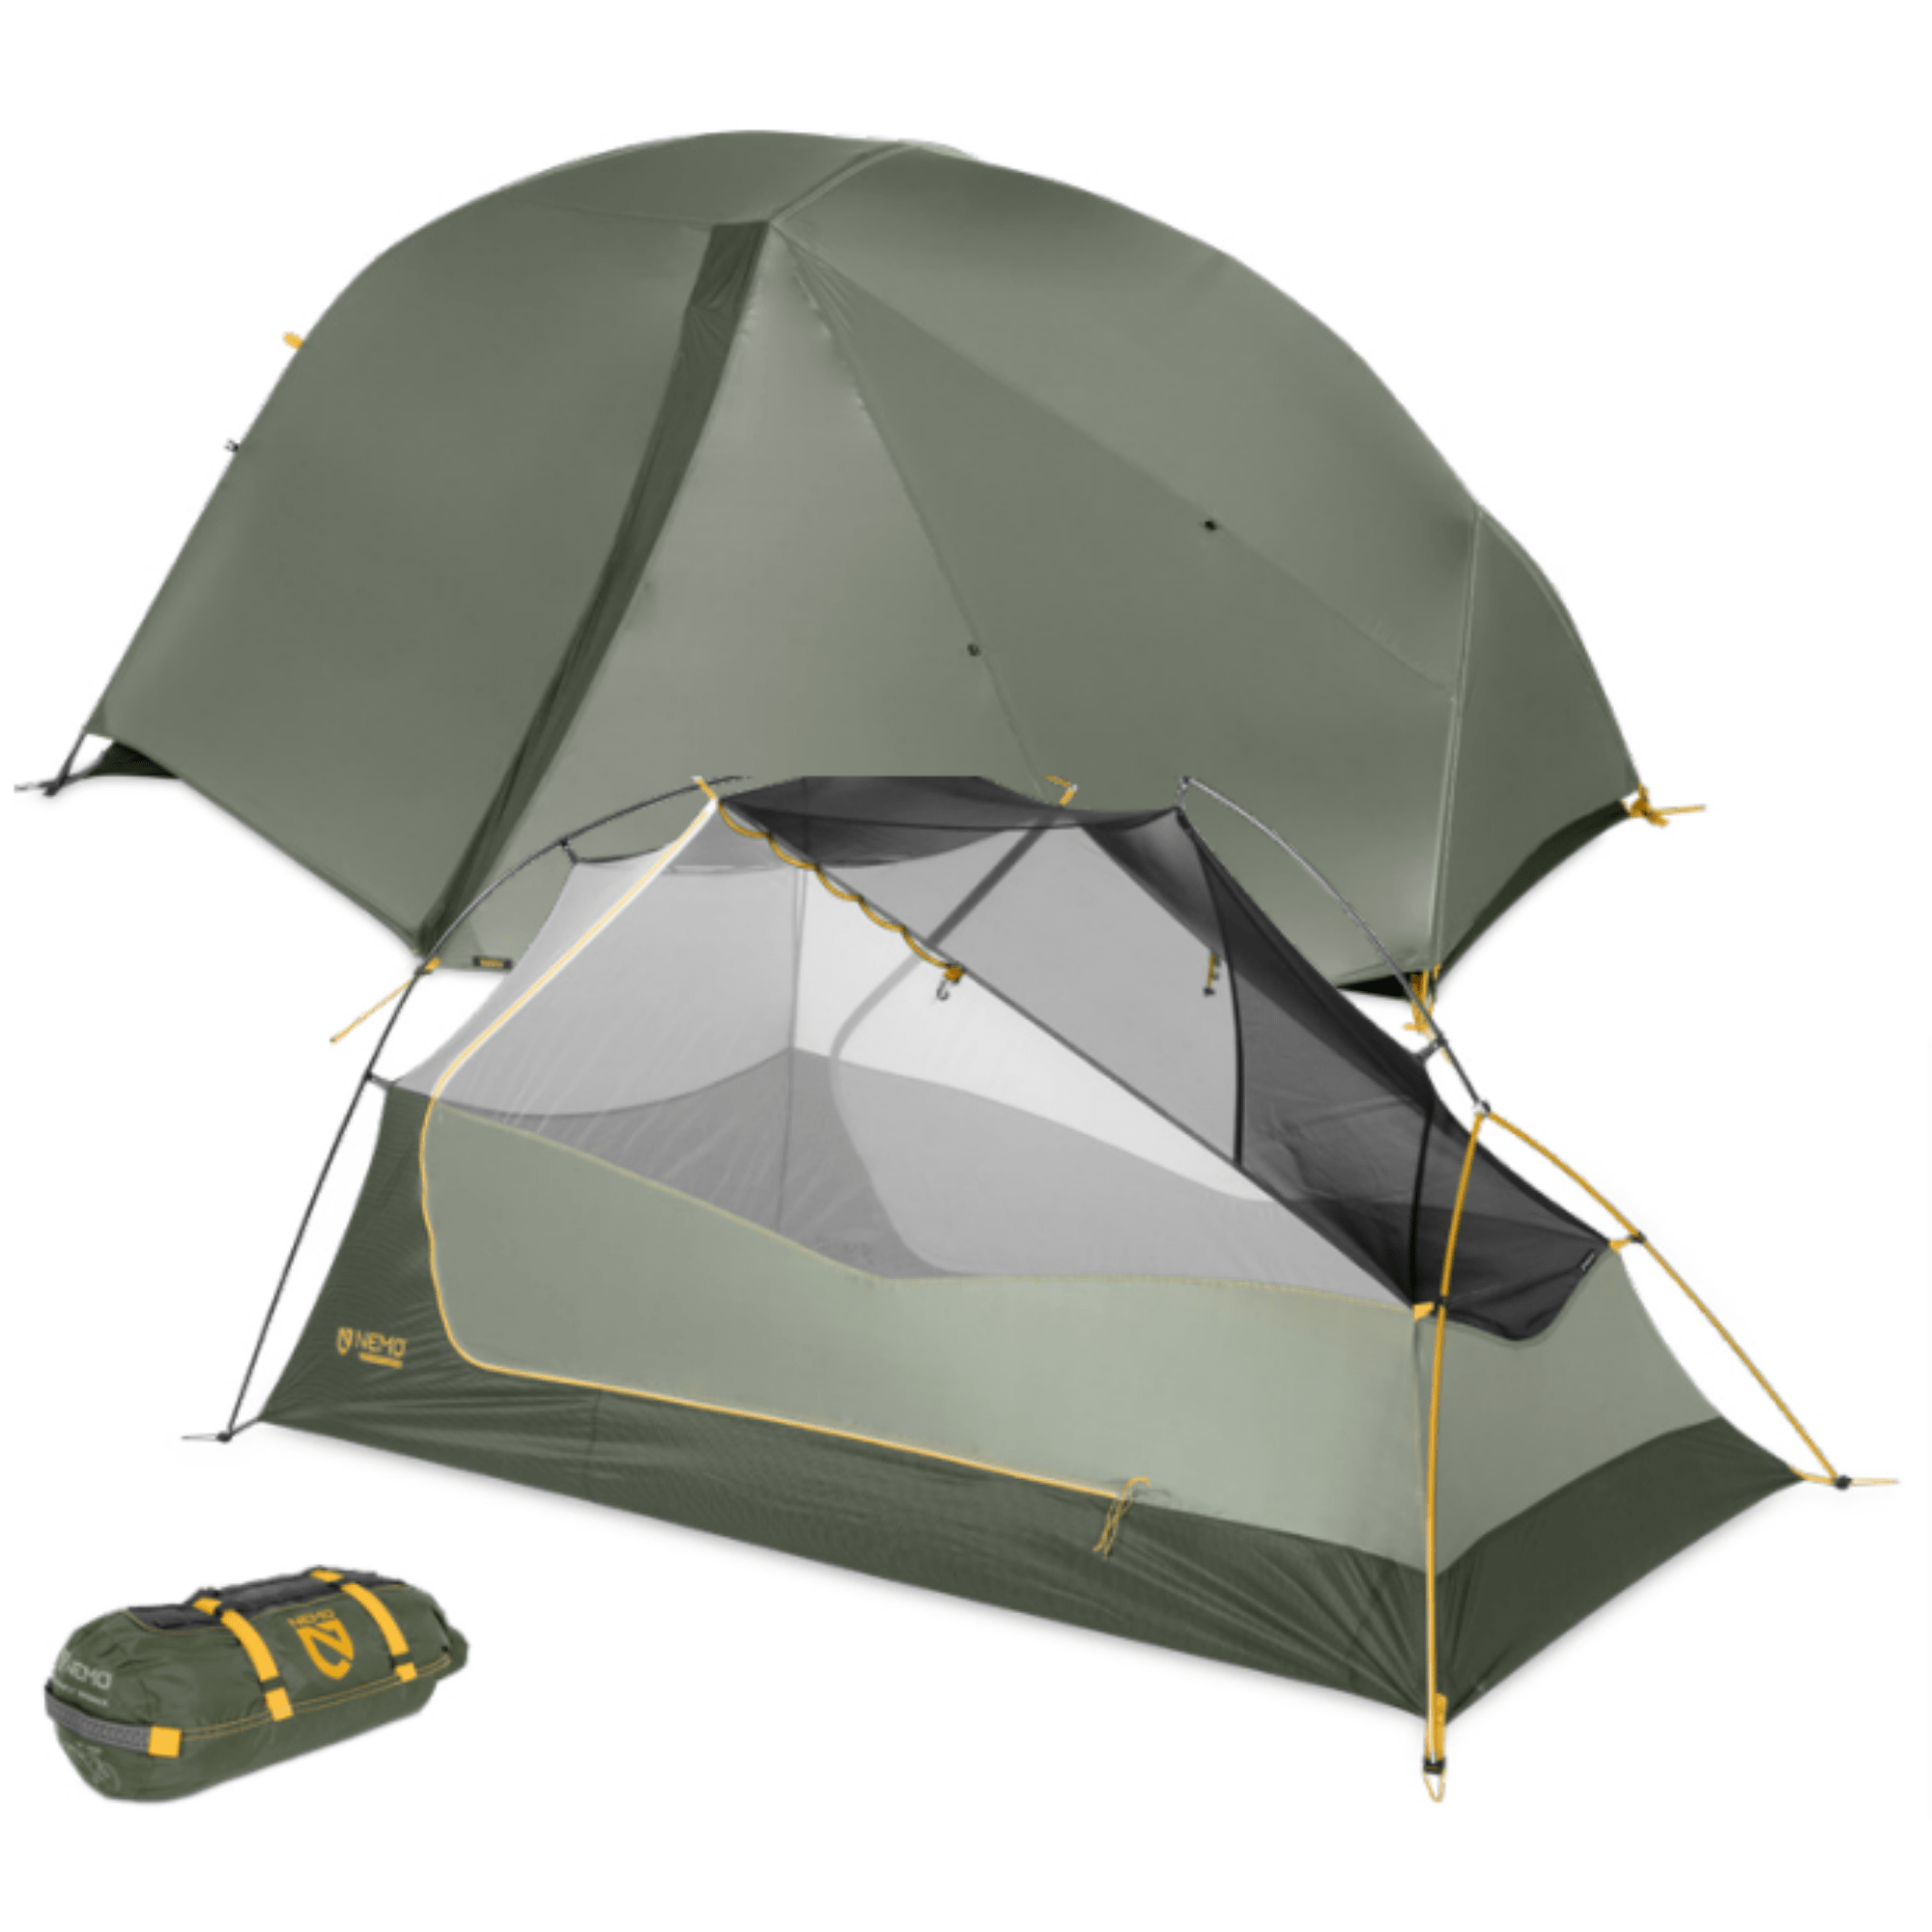 Nemo Tent Dragonfly Bikepack OSMO Backpacking Tent (updated)